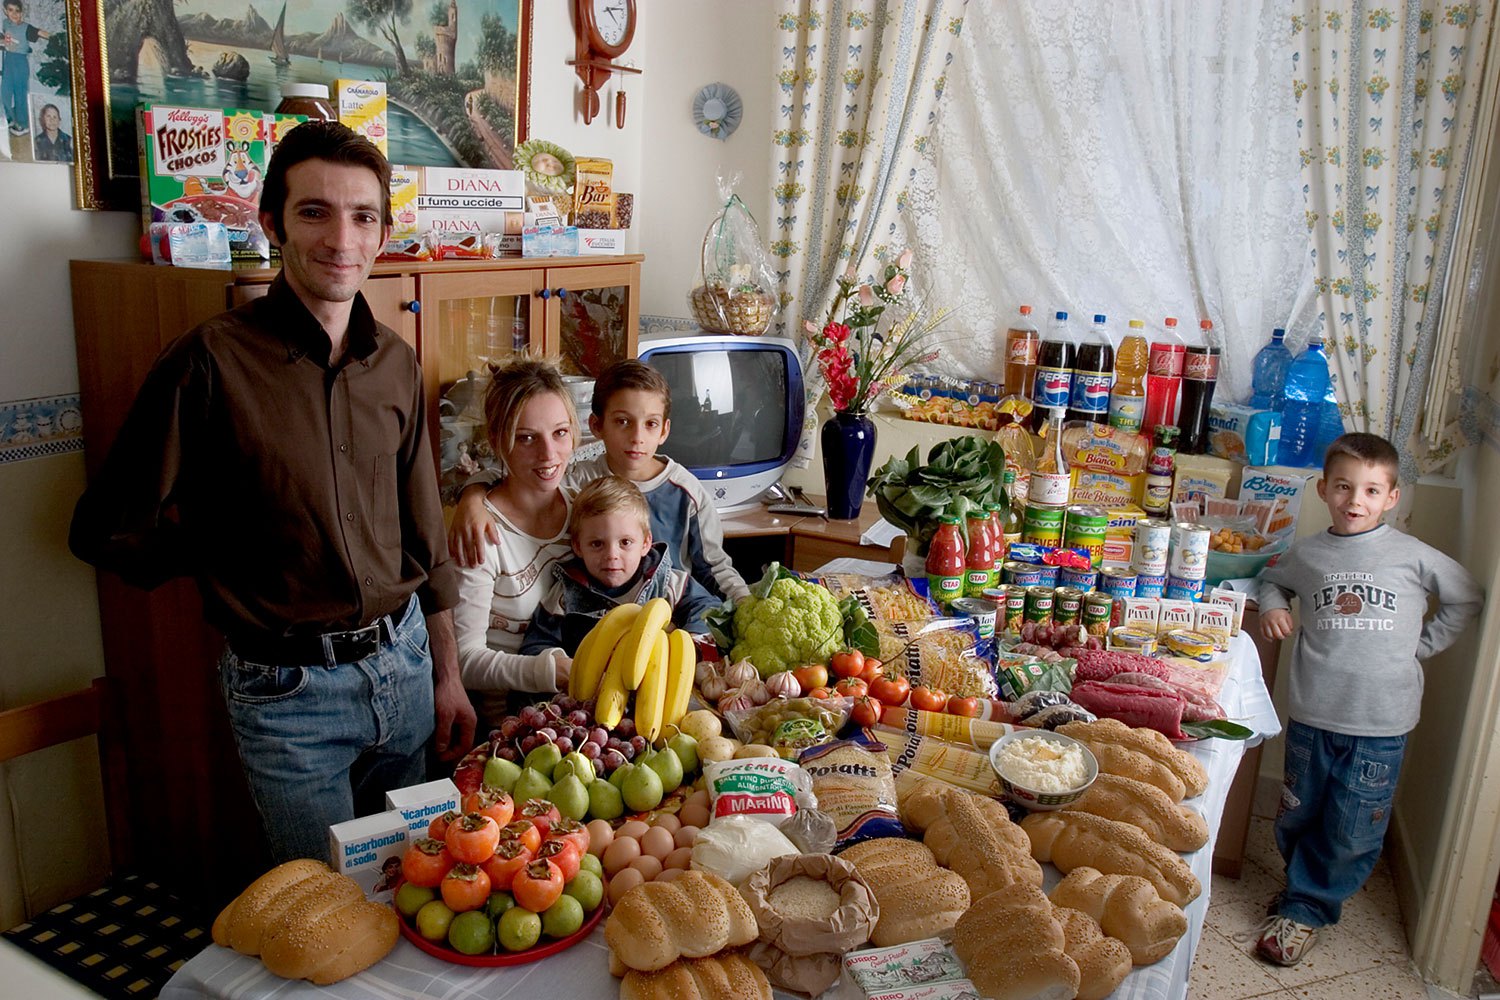 Italy: The Manzo family of Sicily. Food expenditure for one week: 214.36 Euros or $260.11. Favorite foods: fish, pasta with ragu, hot dogs, frozen fish sticks.